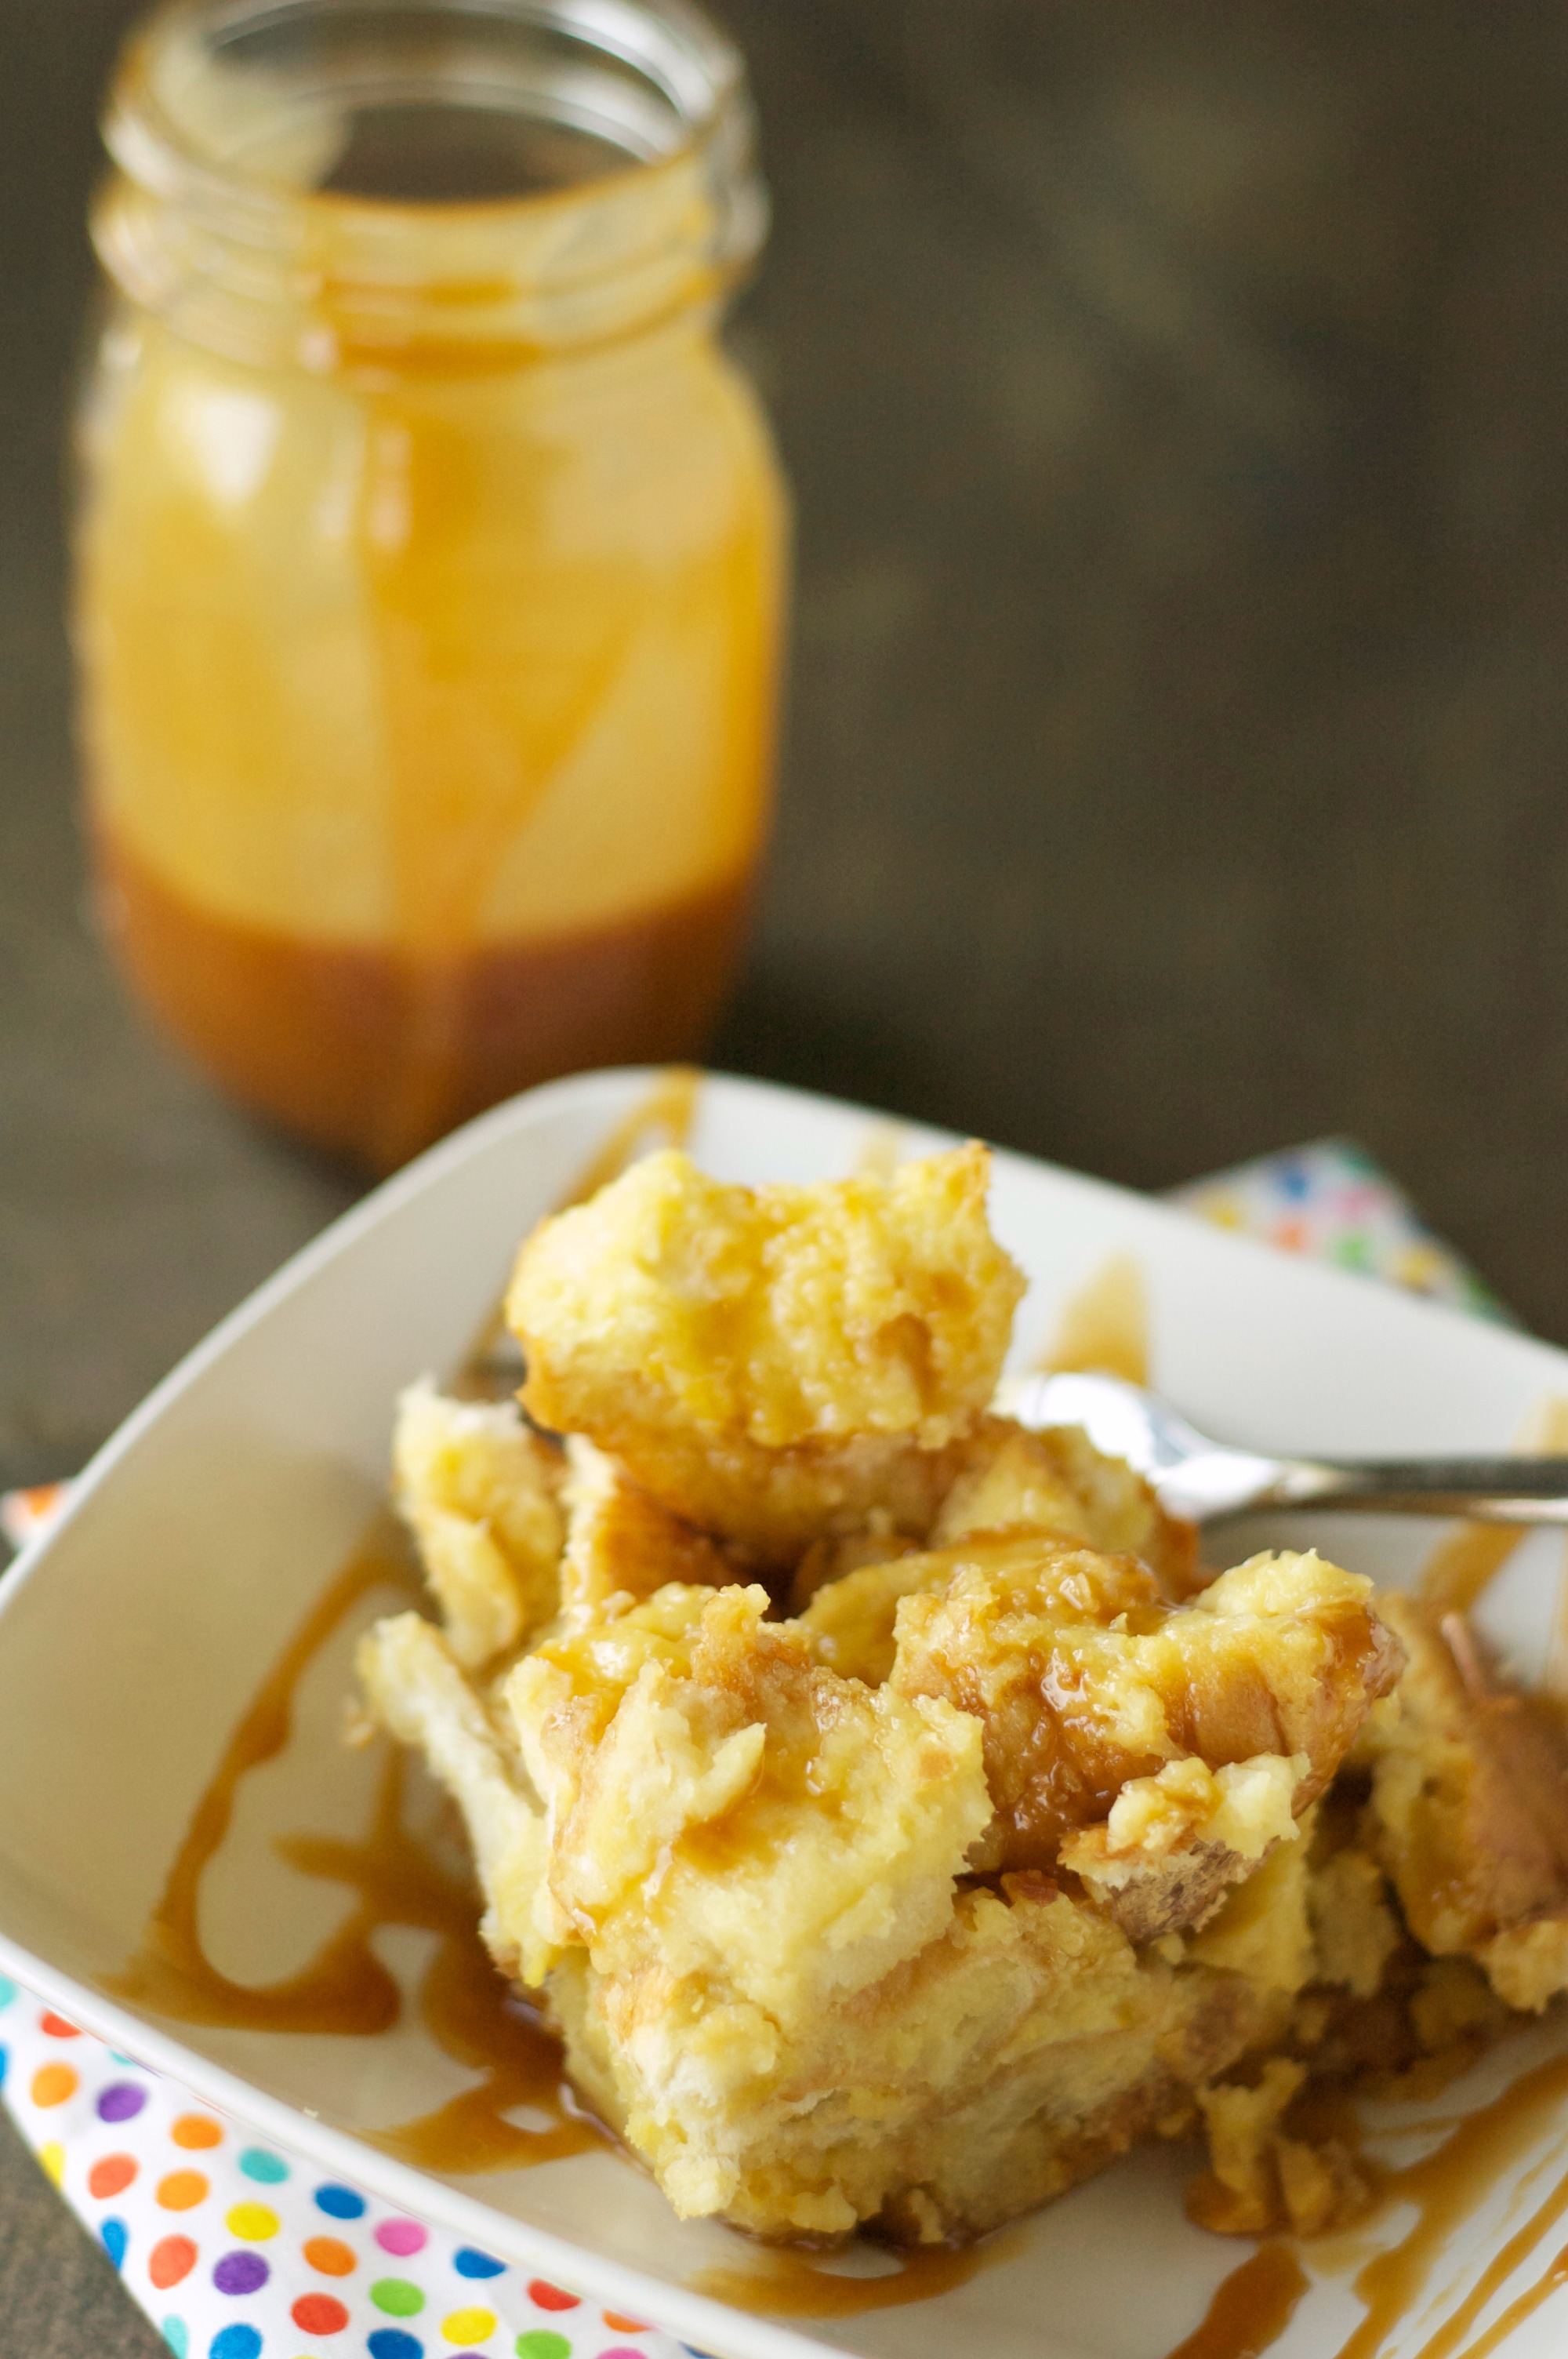 Slow Cooker Bread Pudding drizzled with Salted Caramel Sauce in white bowl on polka dot napkin